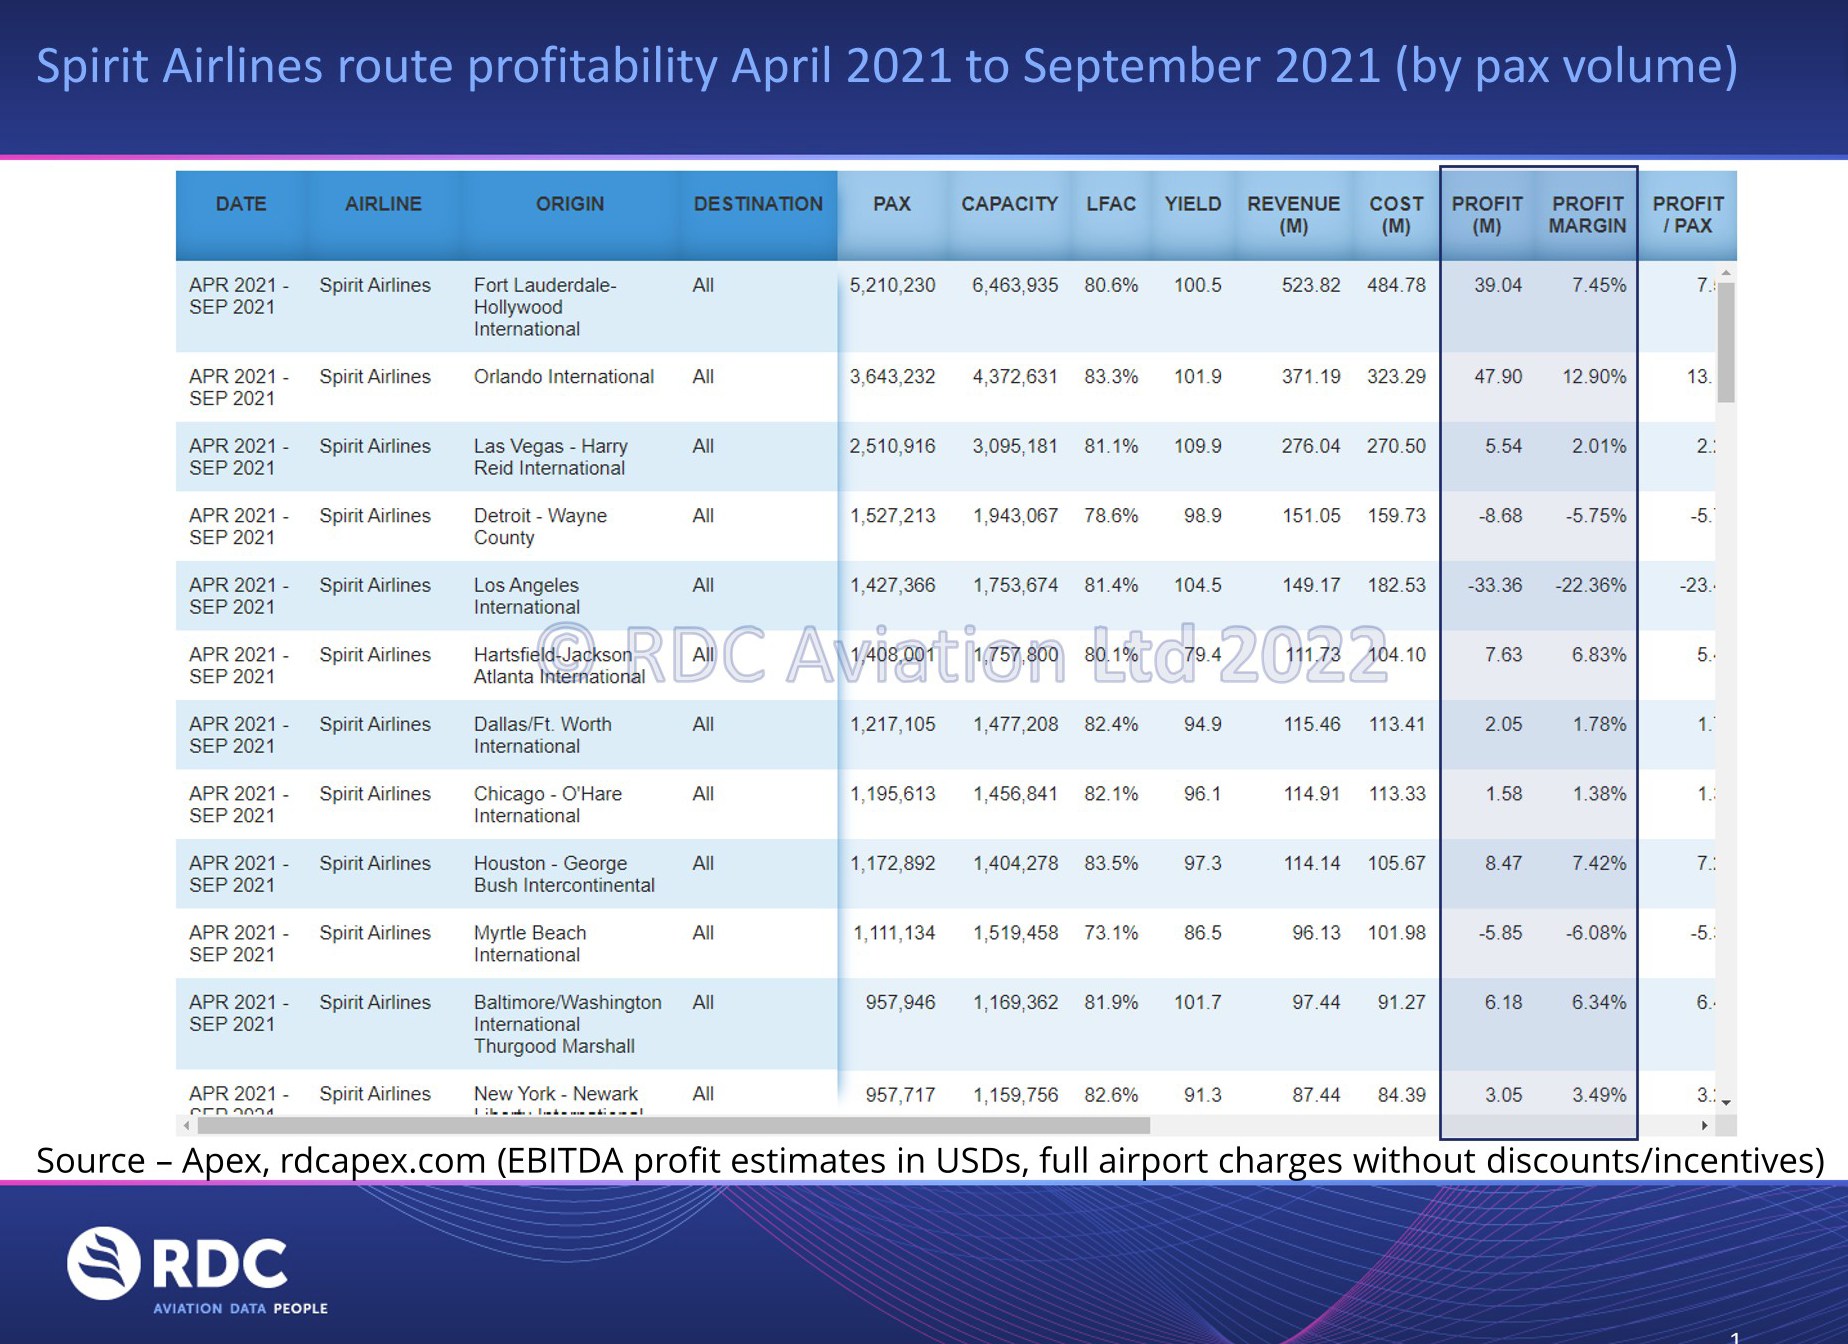 Spirit Airlines route profitability Apr 2021 to Sep 2021